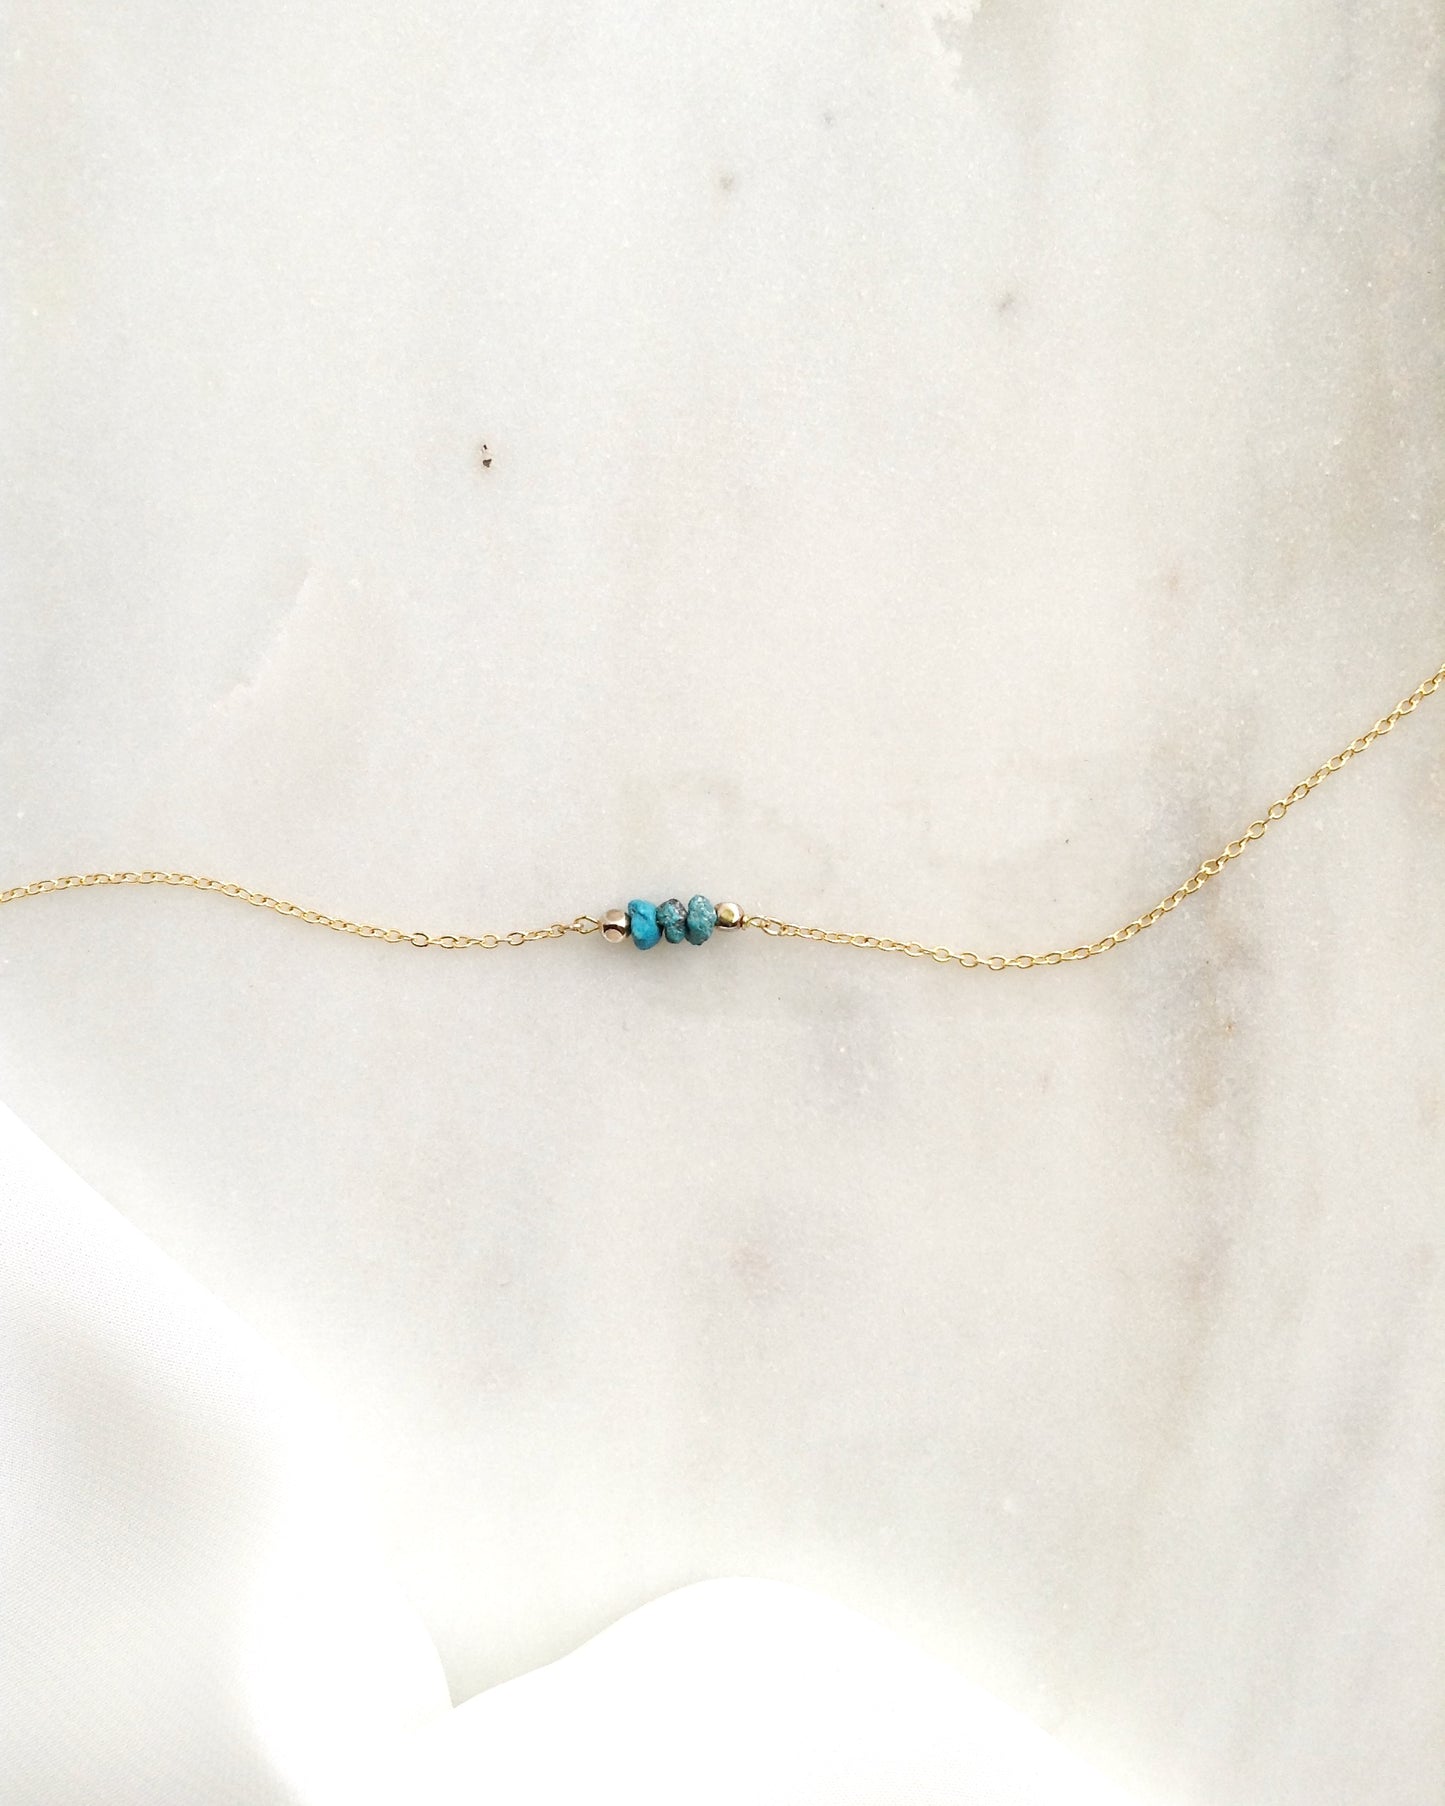 Turquoise Choker in Gold Filled or Sterling Silver | Simple Delicate Choker | Minimalist Choker | IB Jewelry